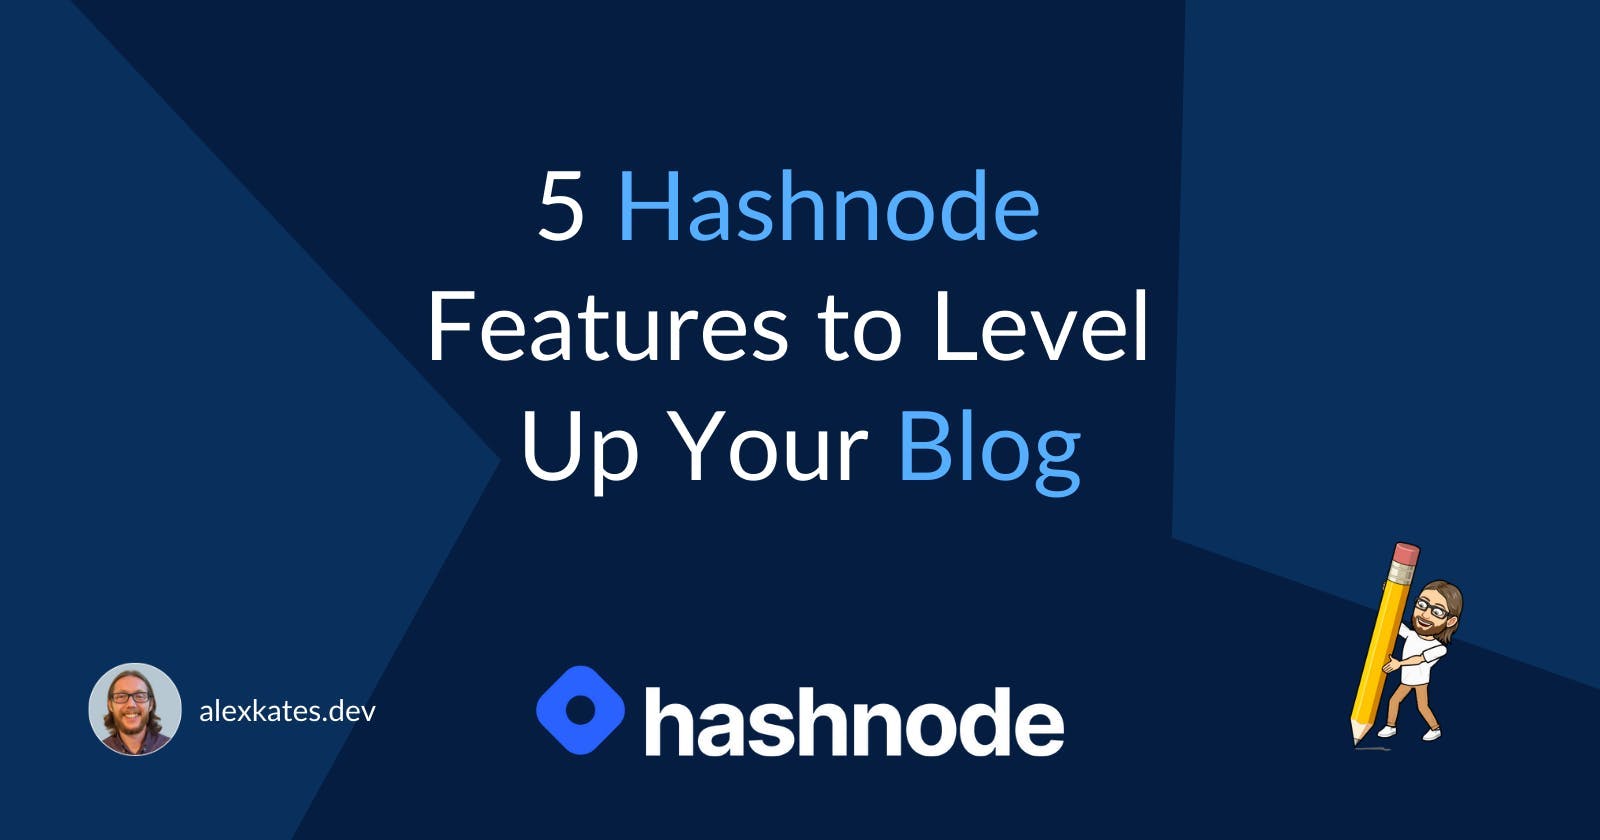 5 Hashnode Features to Level Up Your Blog